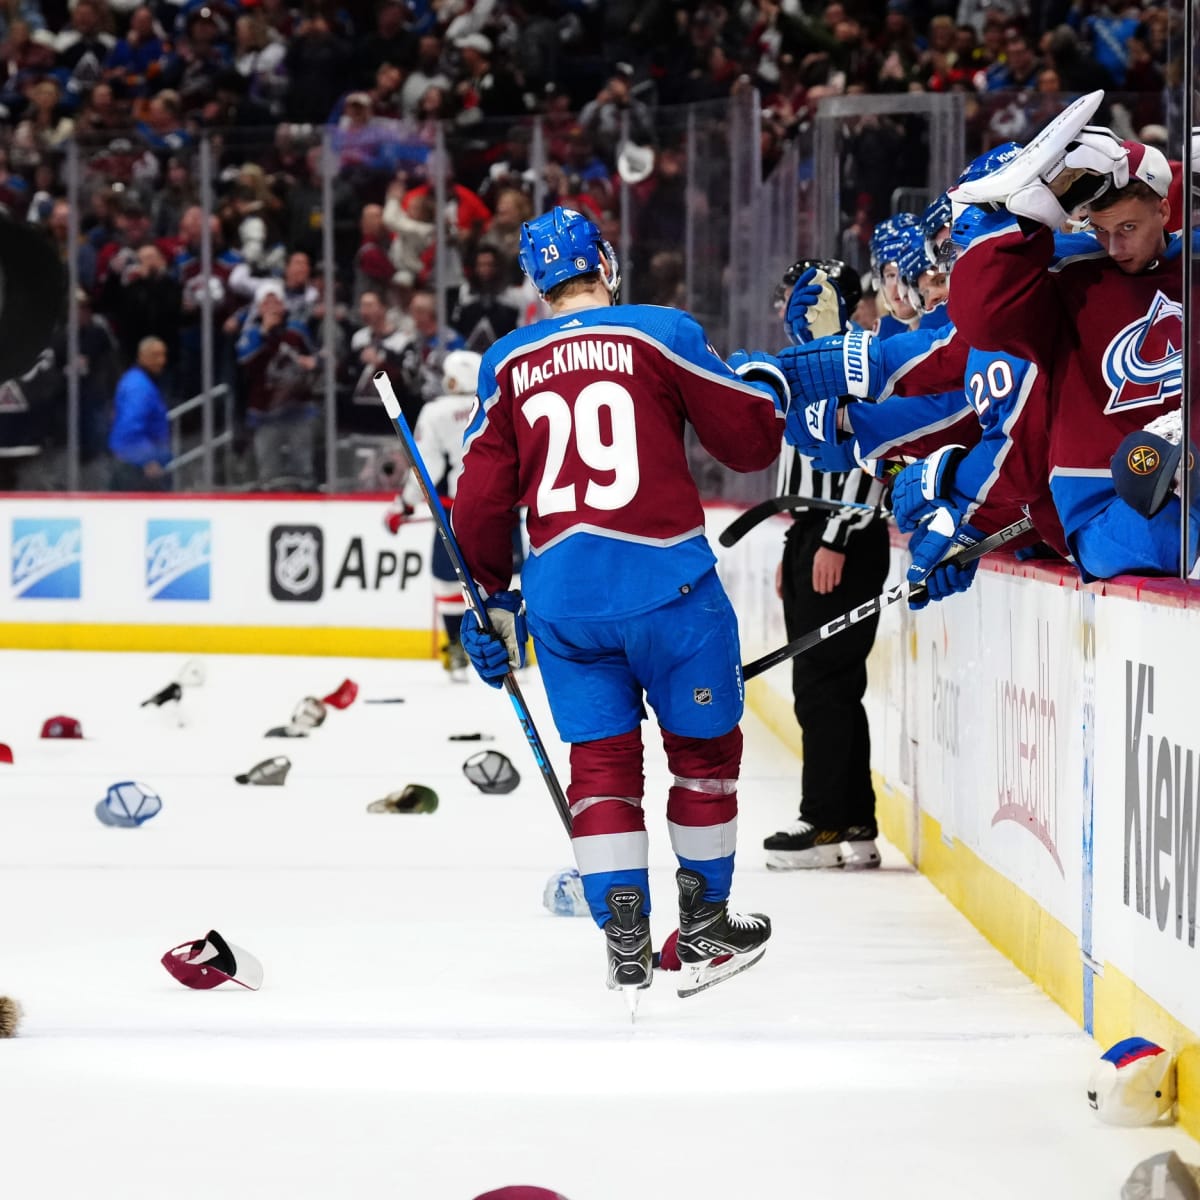 Nathan MacKinnon scores 4 goals and bra, thong are tossed on ice